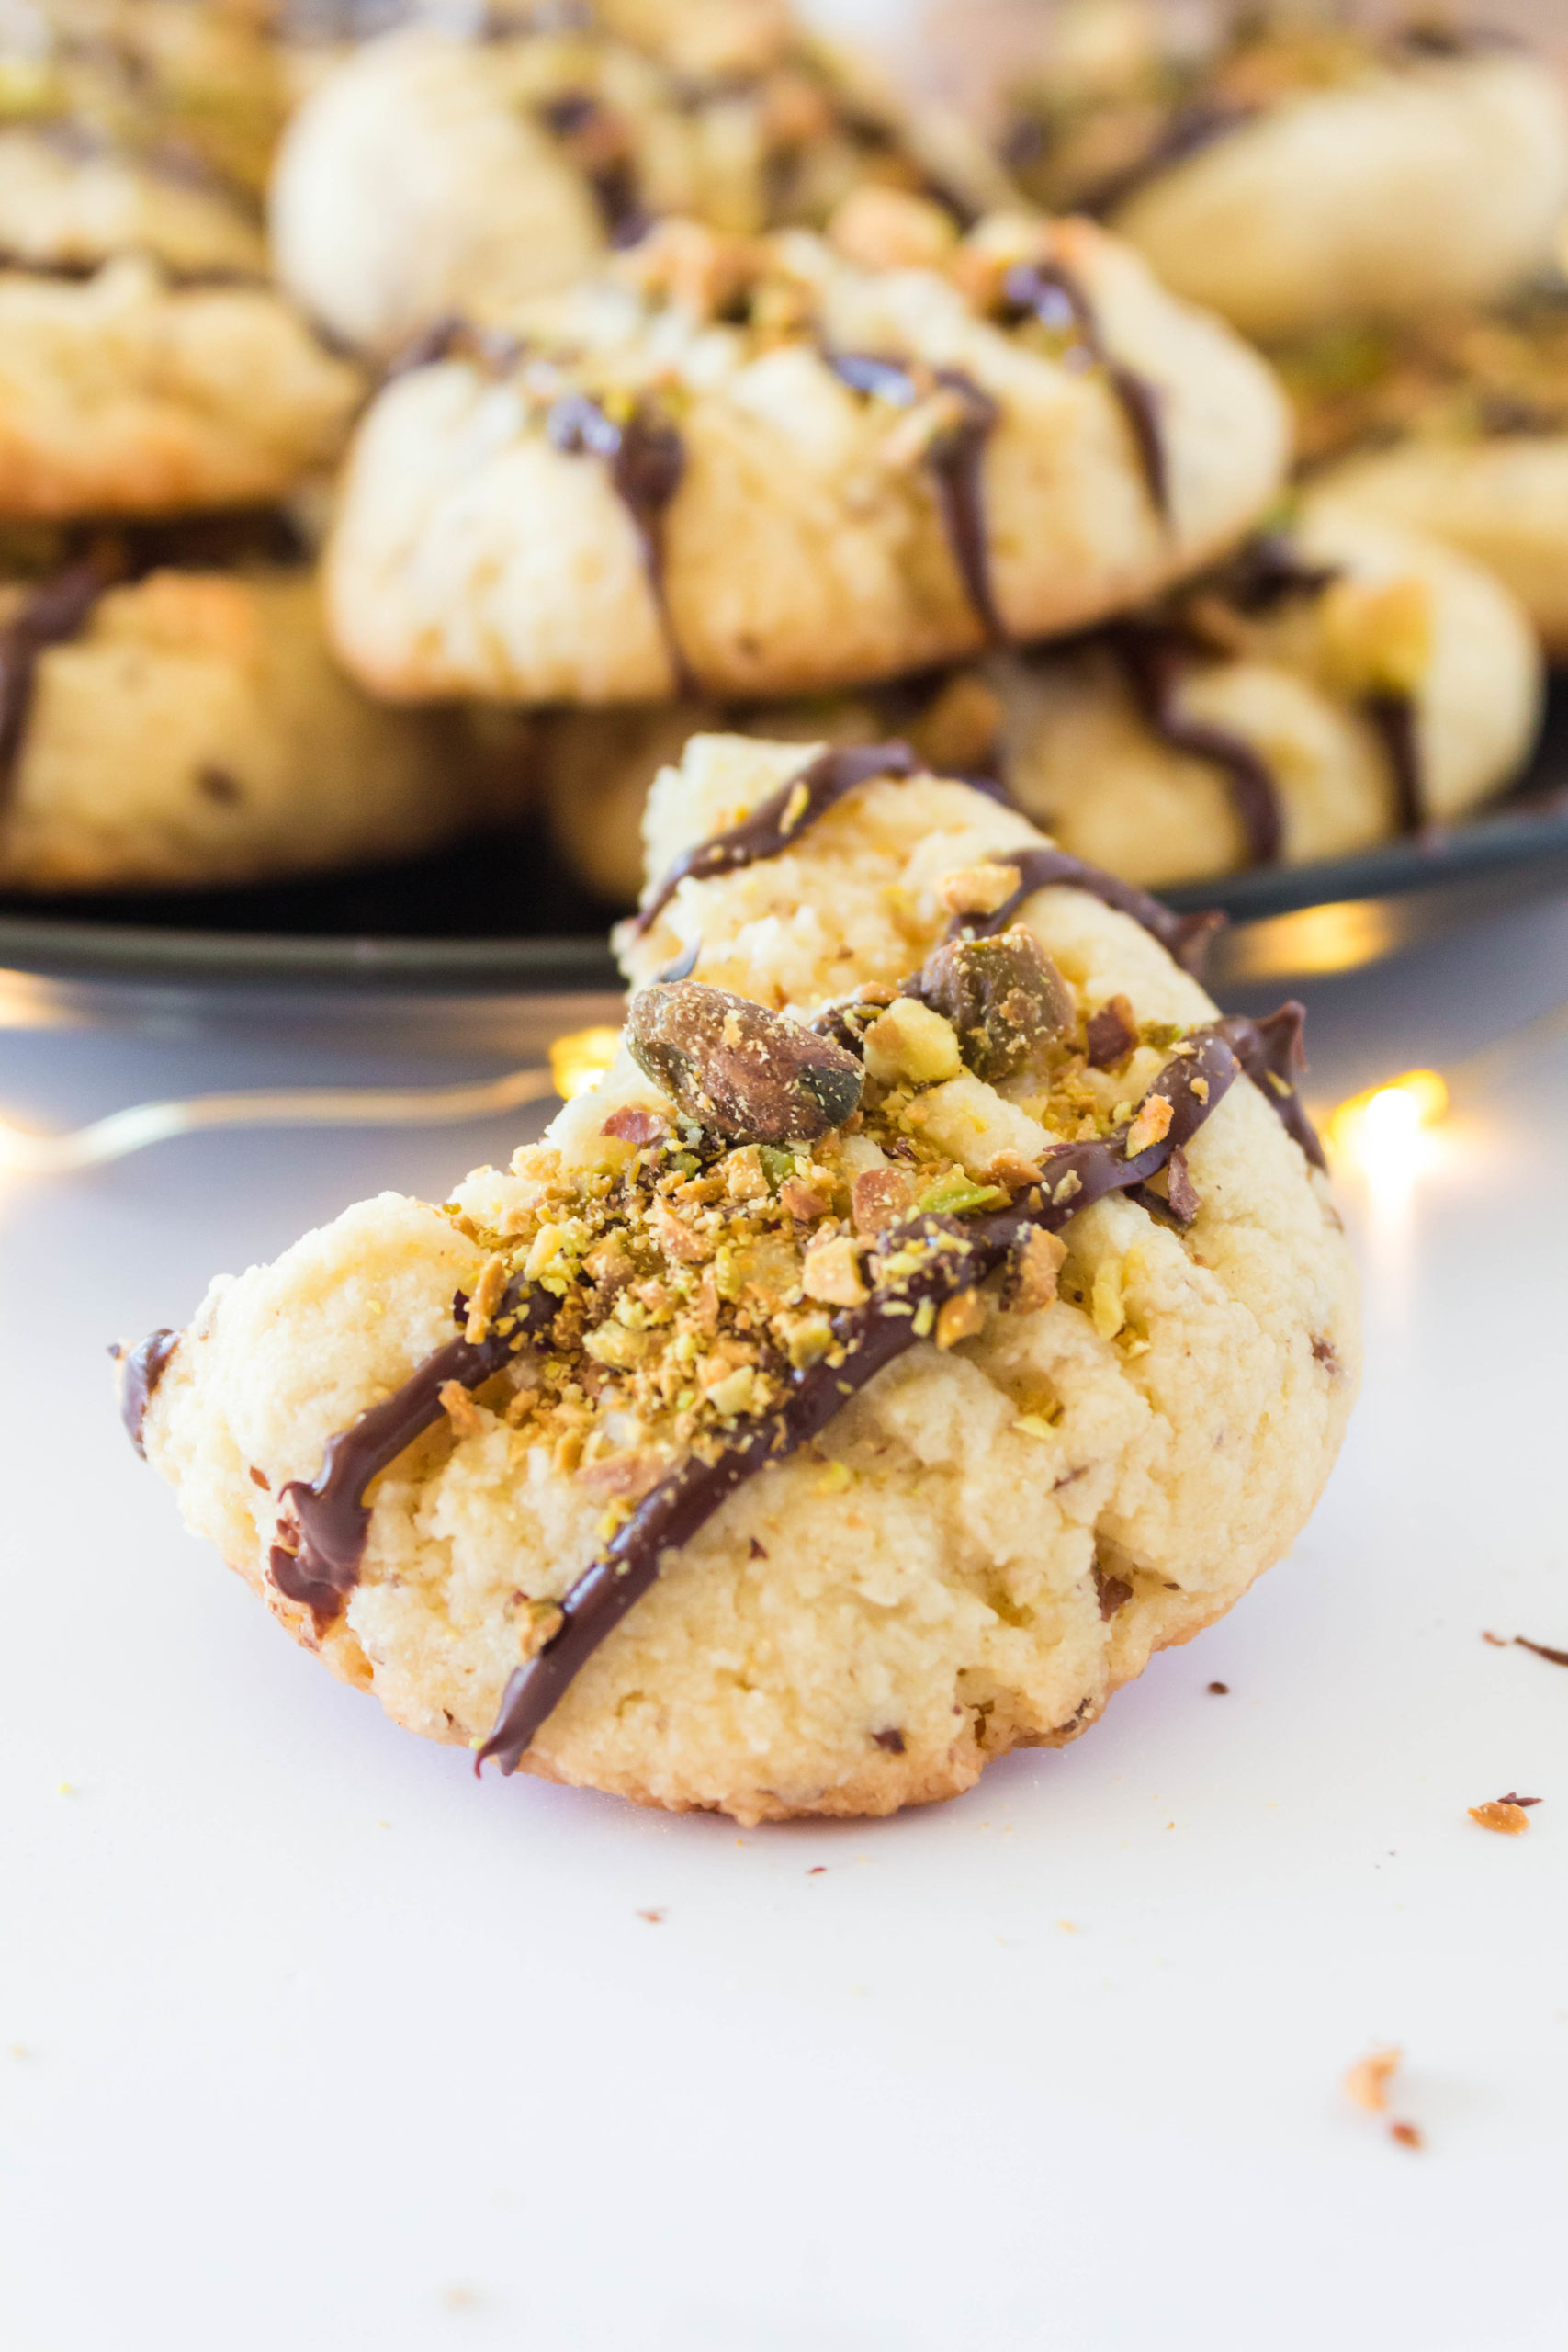 Picture of keto butter cookie with chocolate drizzle and chopped pistachios on top with a bite taken out of it.